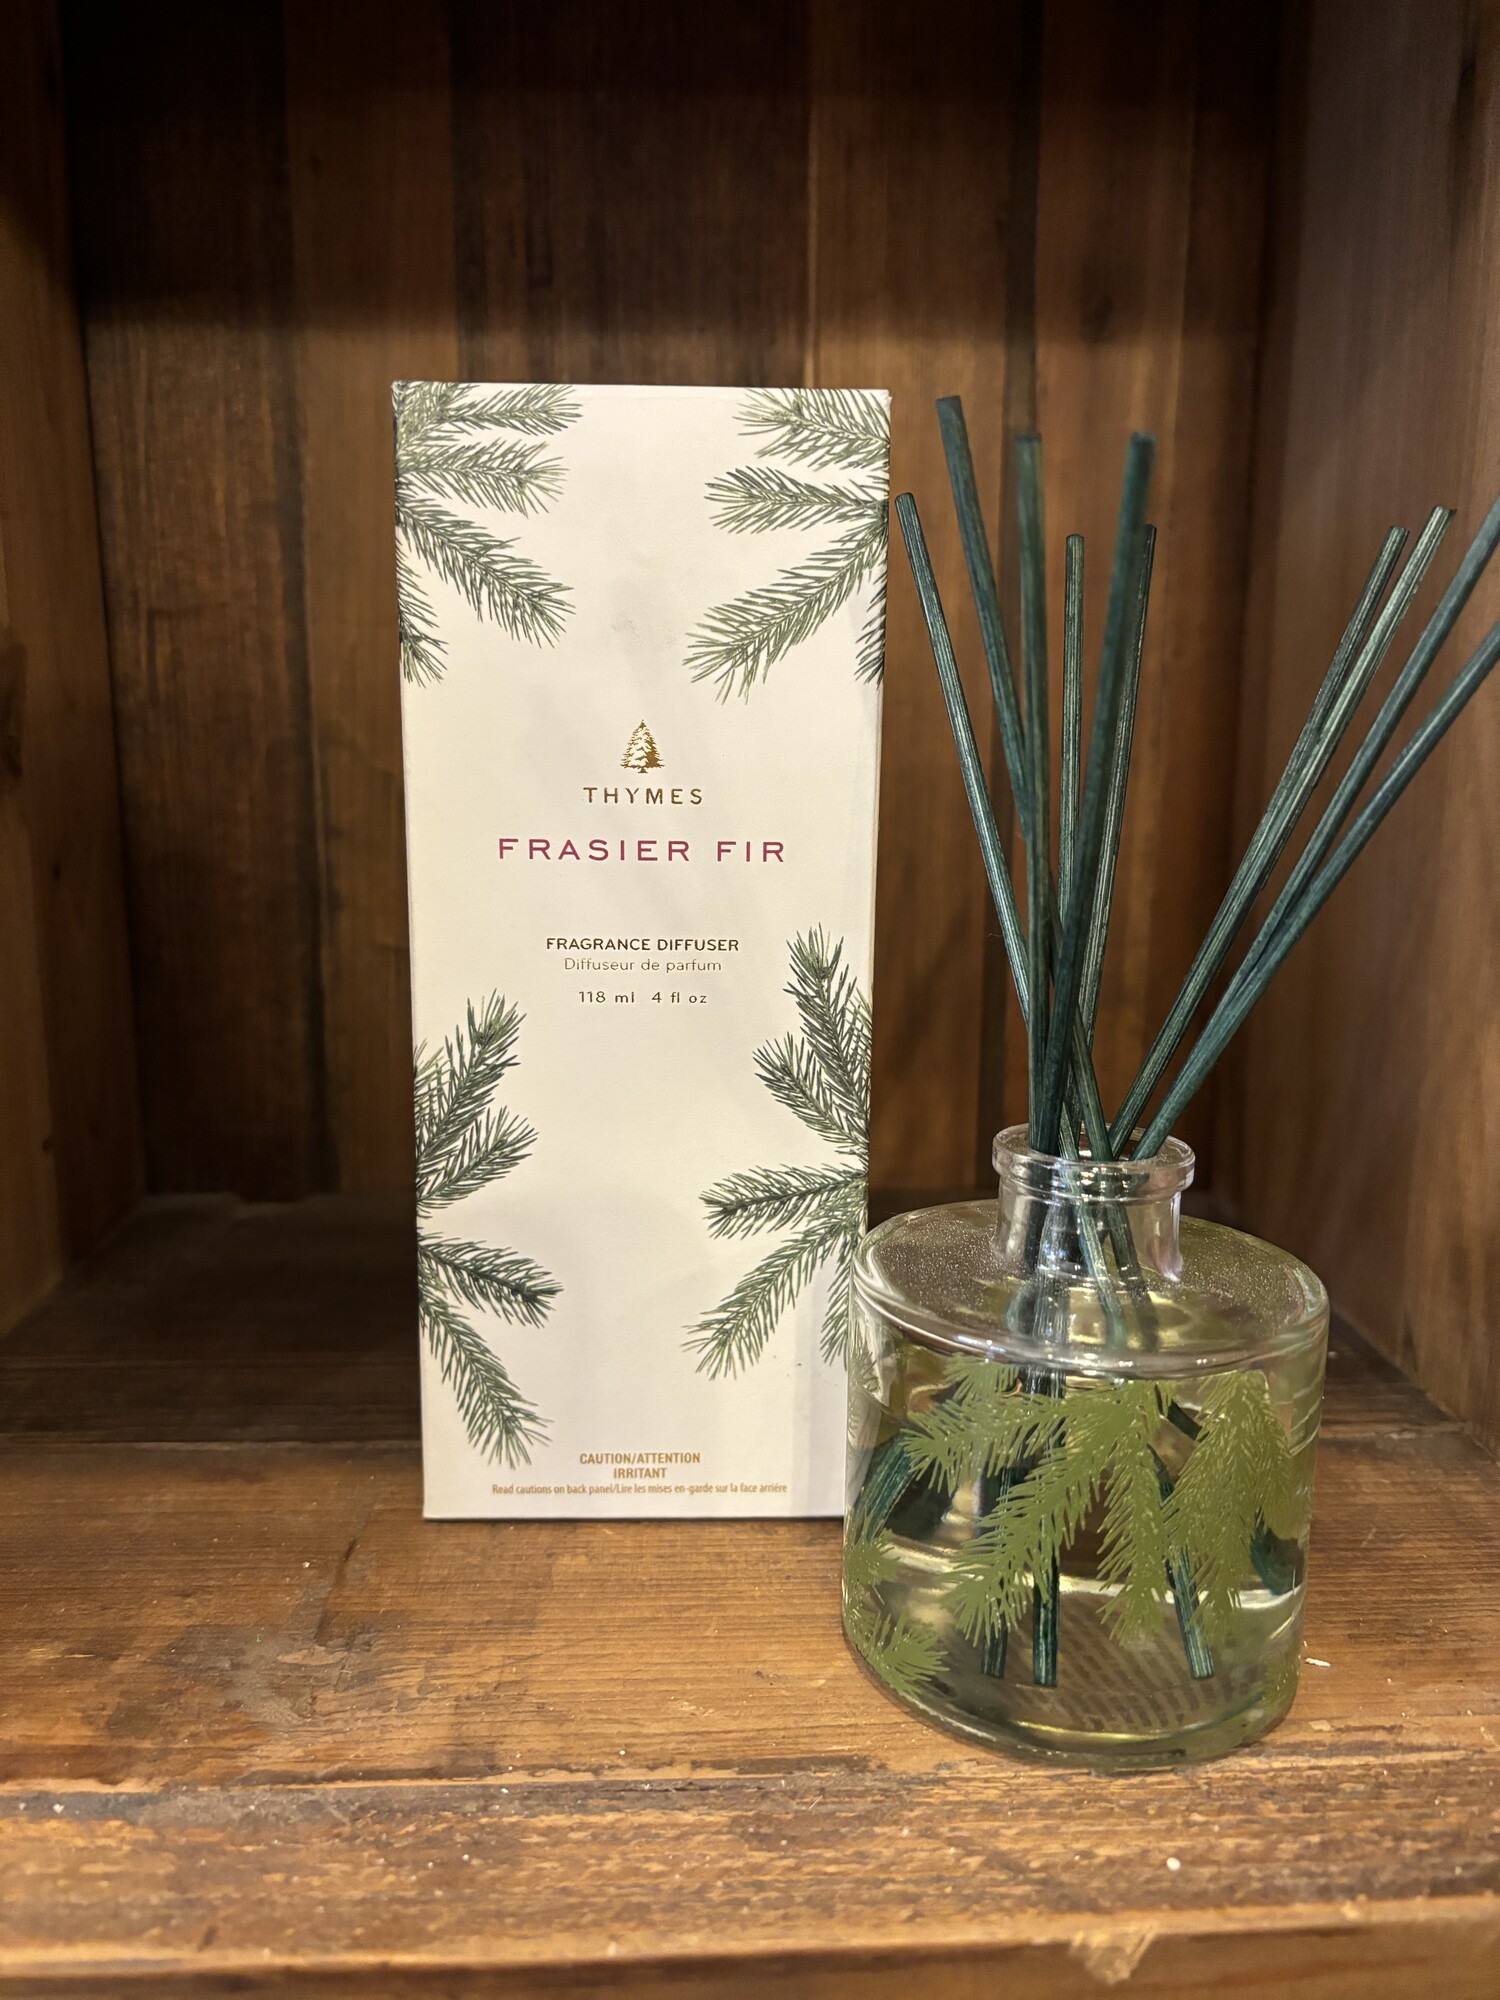 Moutain fresh and glowing with a snap of crisp siberian fir needles, cedarwood and relaxing sandlewood. This highly aromatic reed diffuser has such a beautiful scent that smells like a fresh cut Christmas tree but is great to use year round. This diffuser is 4 ounces